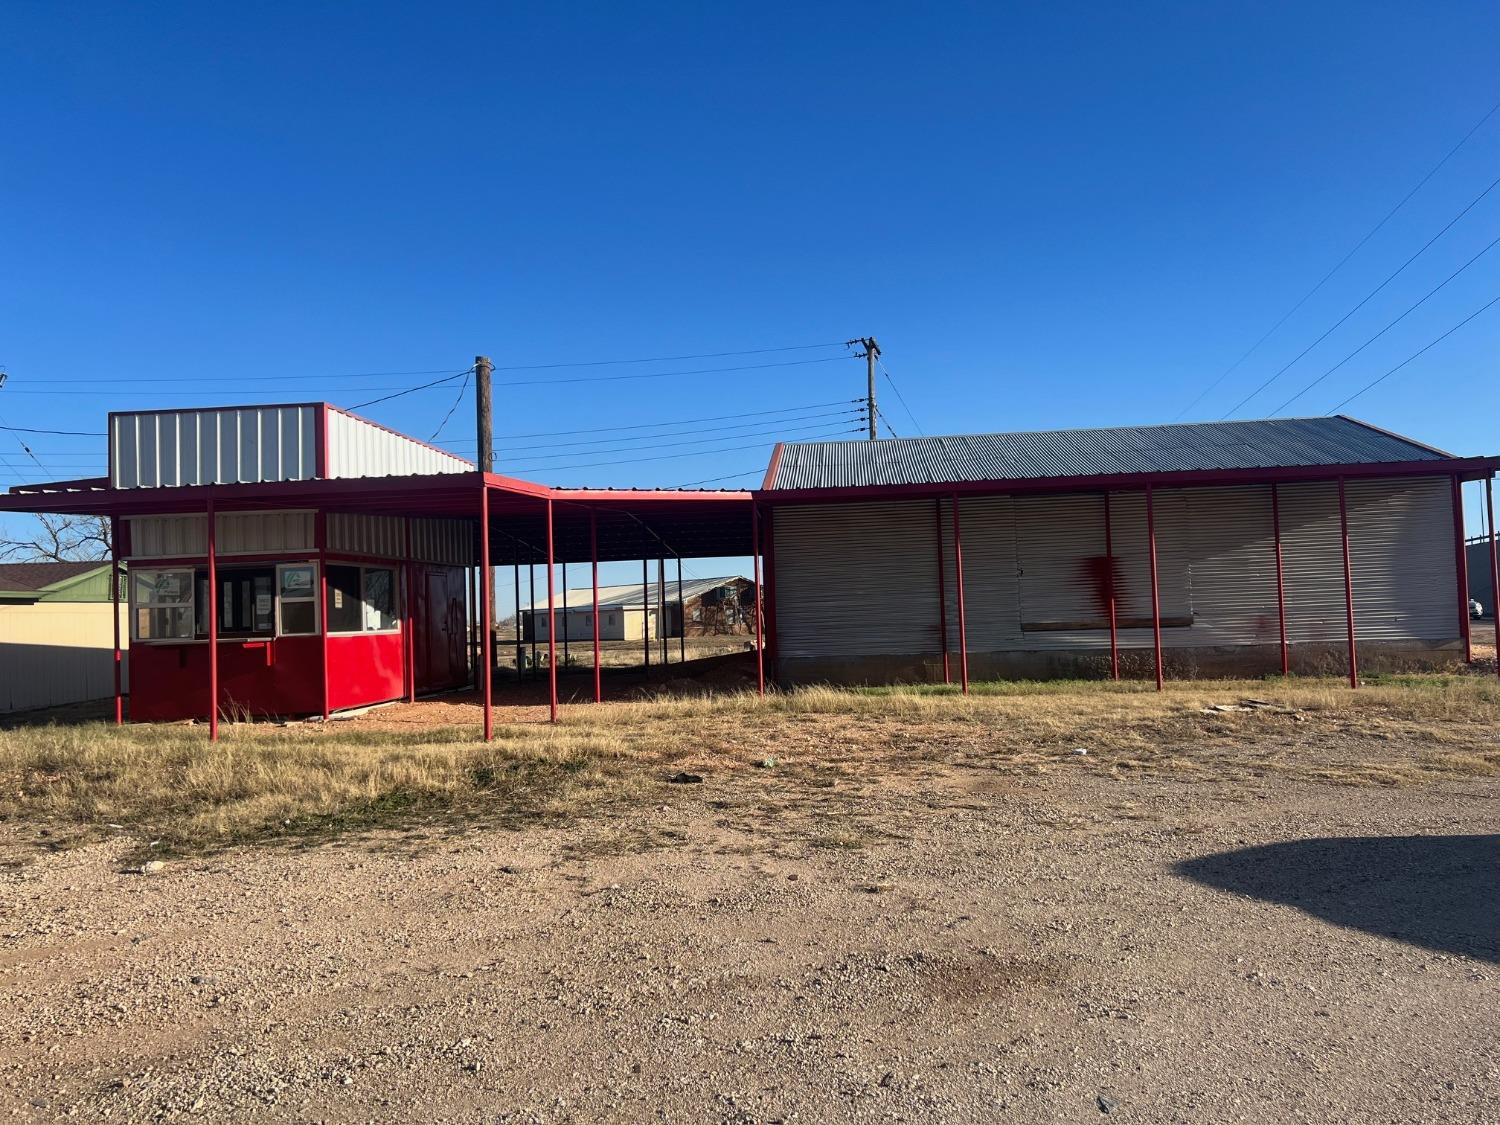 Unique property in North East Lubbock.  Small Drive thru restaurant and potential eating area.  New water line, sewer line and new 1000 gallon grease trap.  All ovens and cooking items stay. Lots of different options.